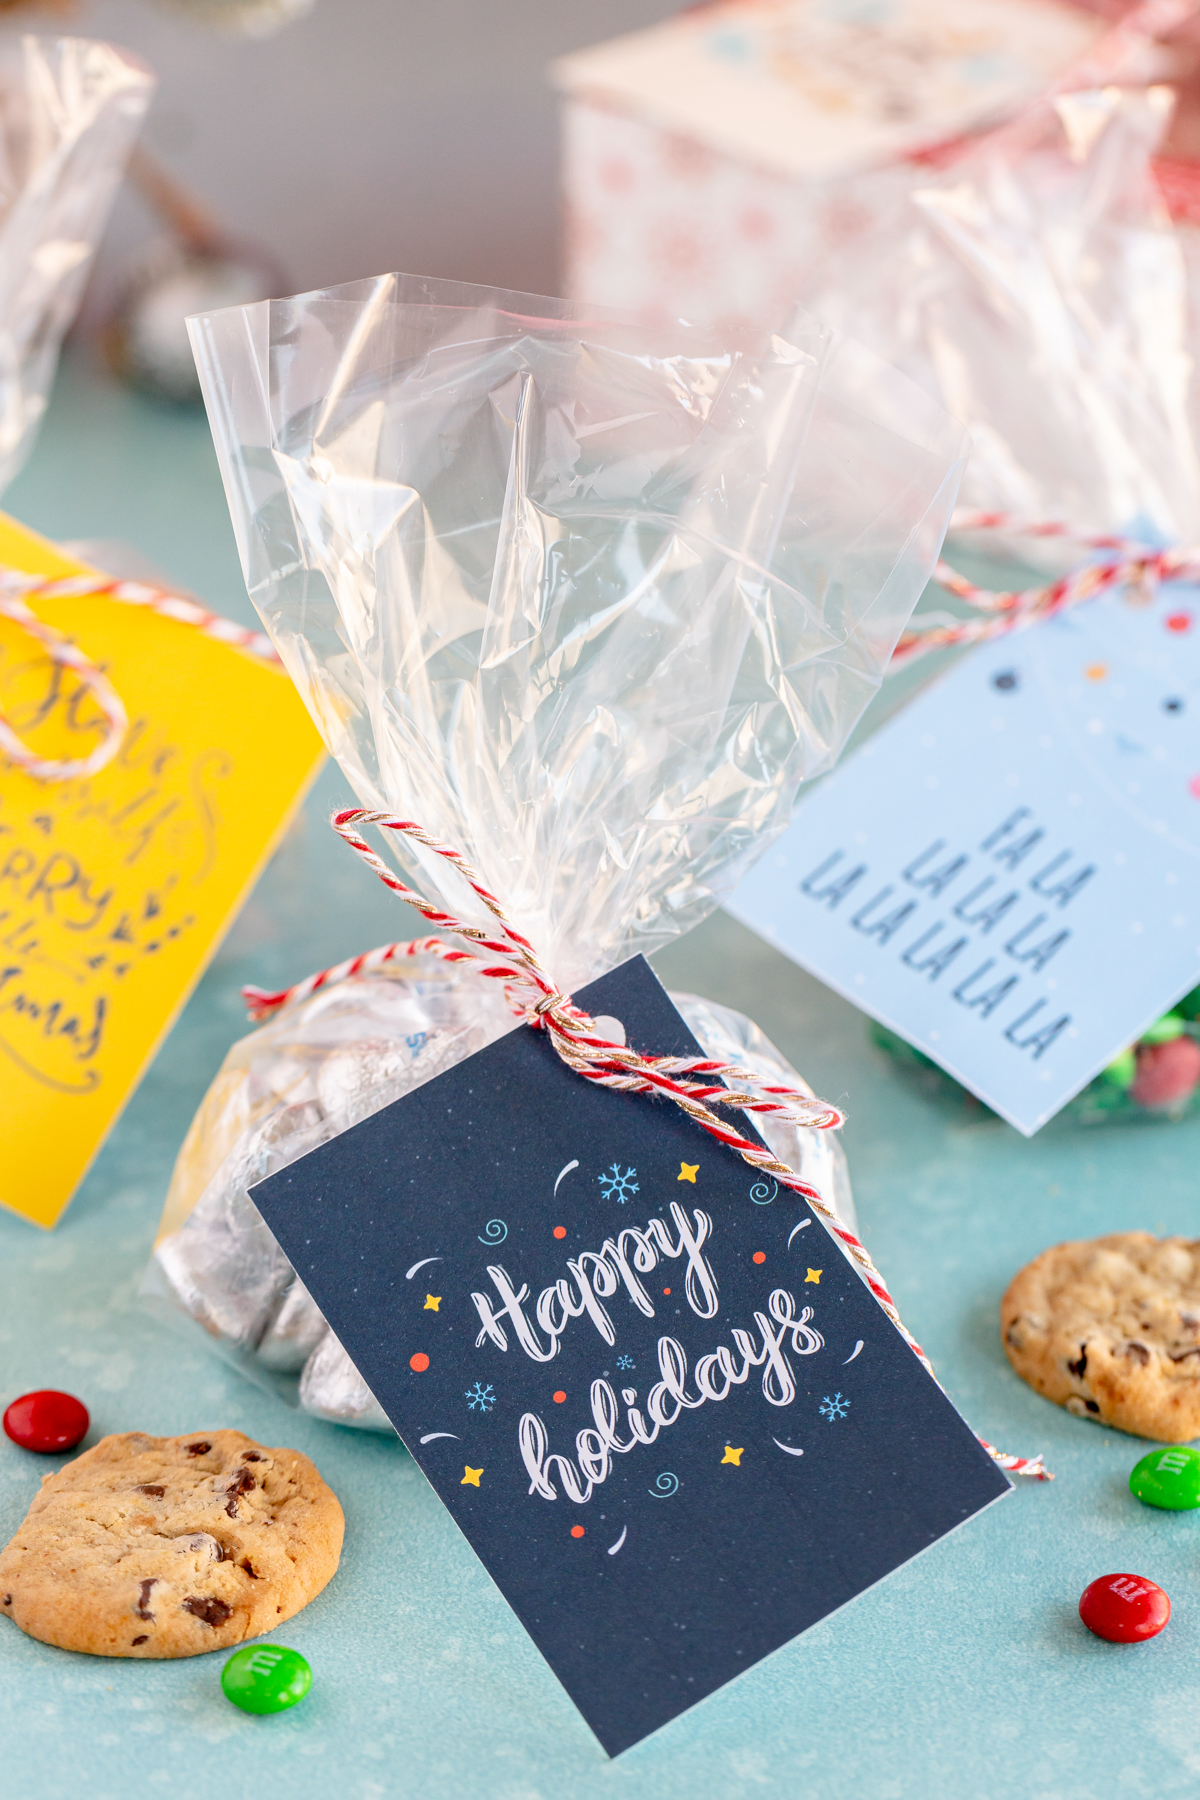 Bags of treats with Christmas gift tags